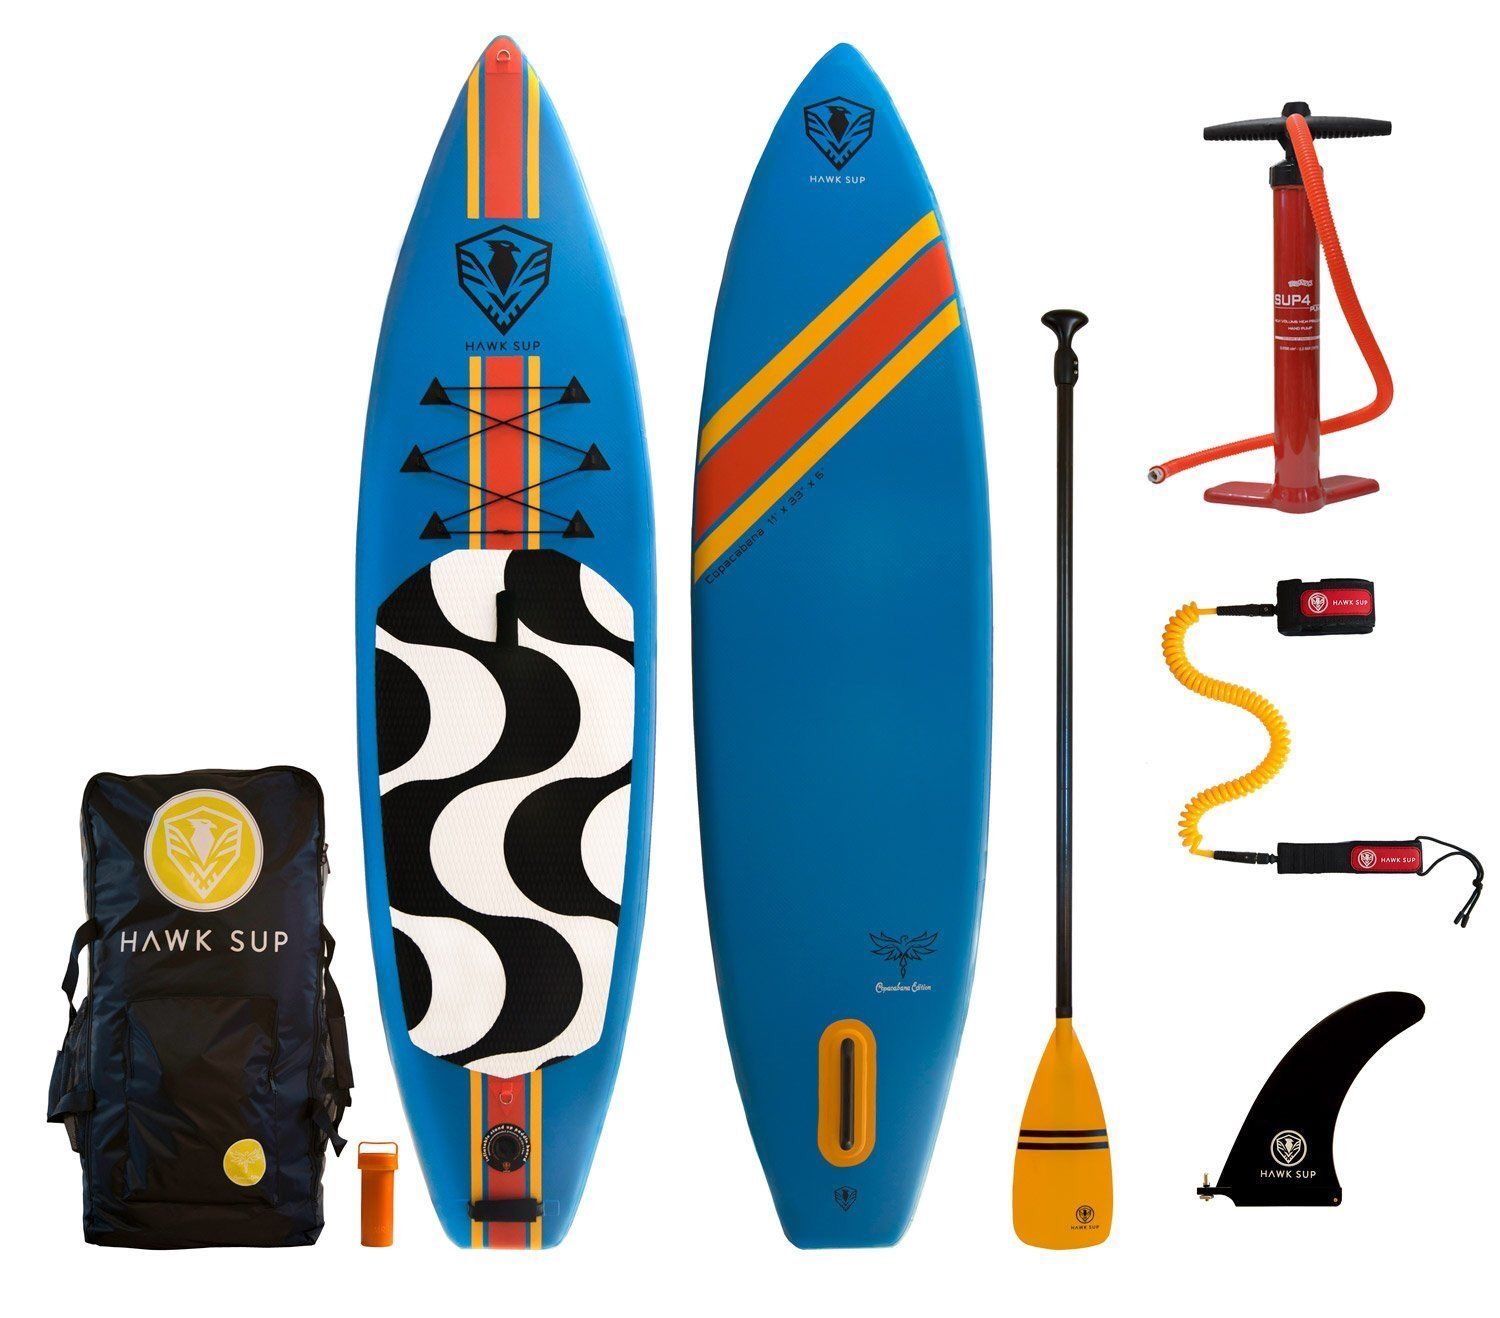 HAWK SUP Stand Up Paddle Board - Copacabana edition